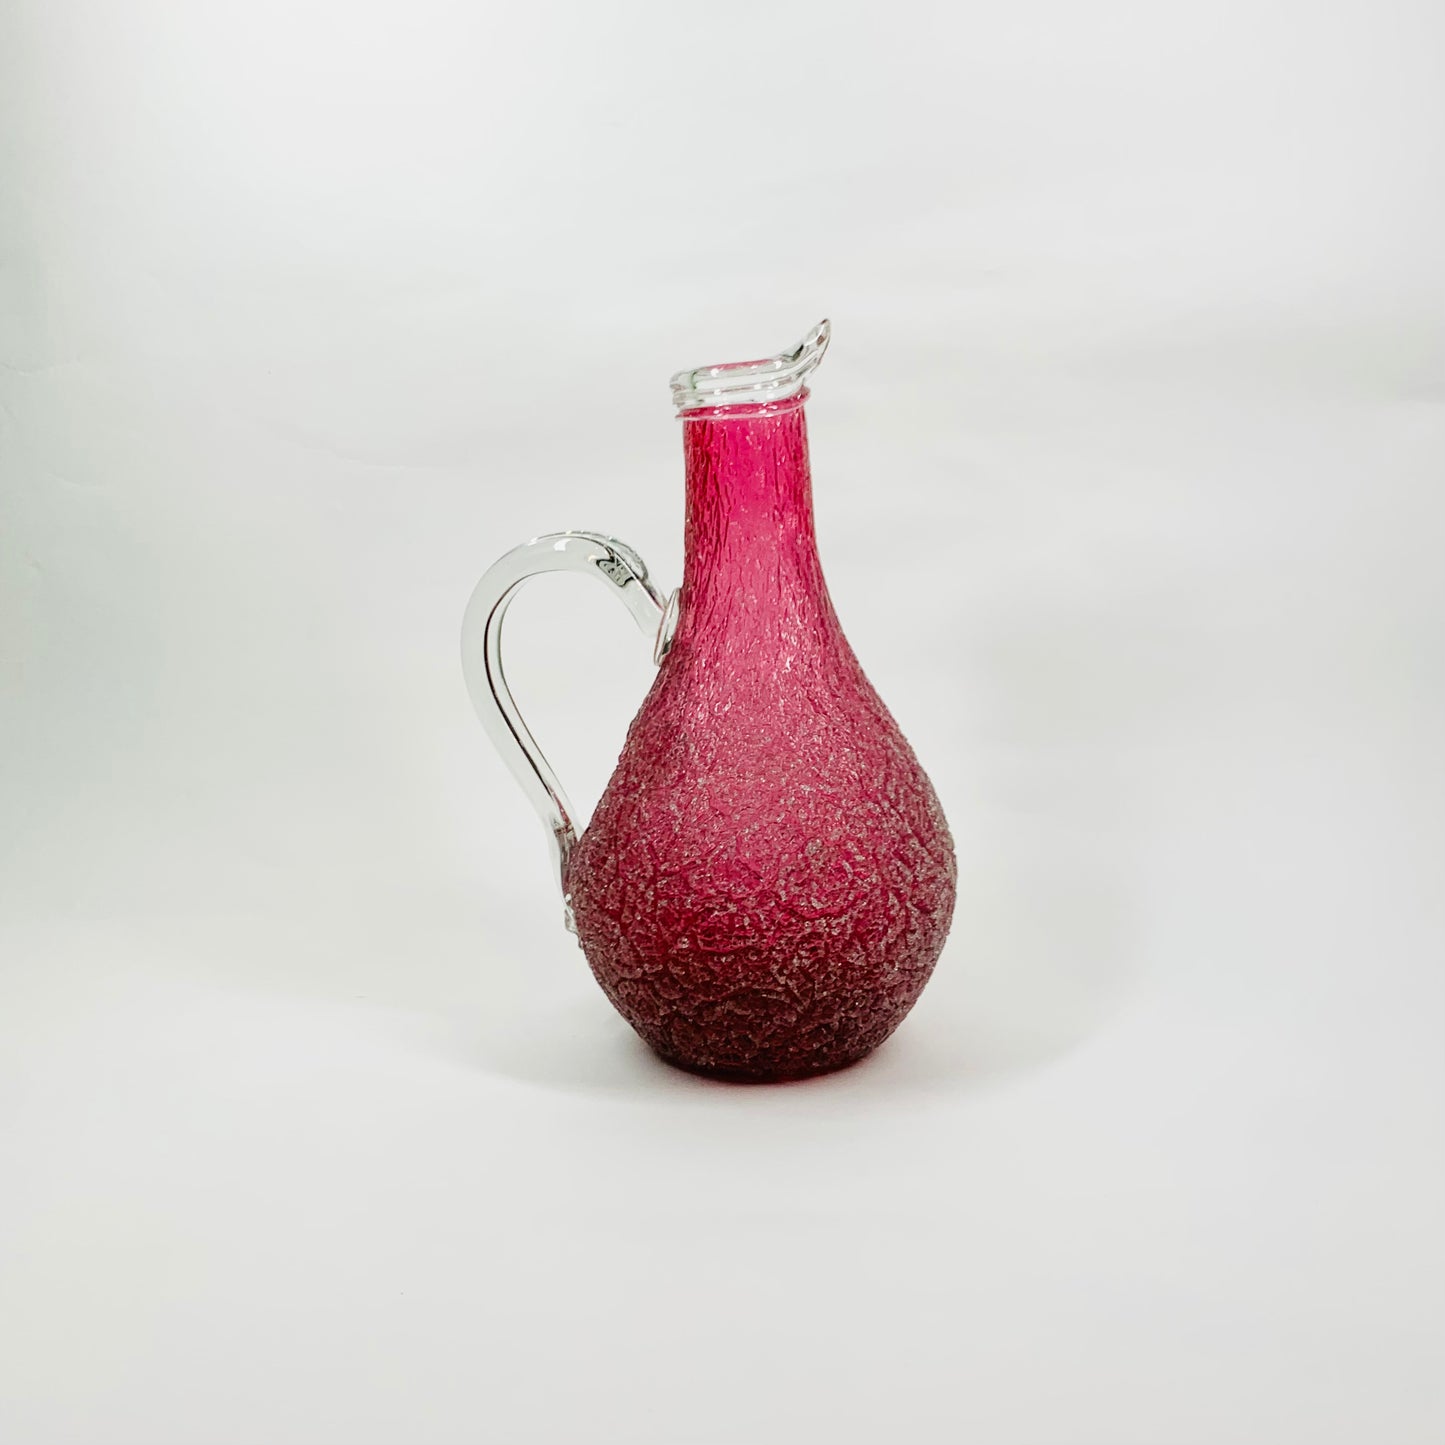 Antique Victorian cranberry crackle glass jug with clear handle